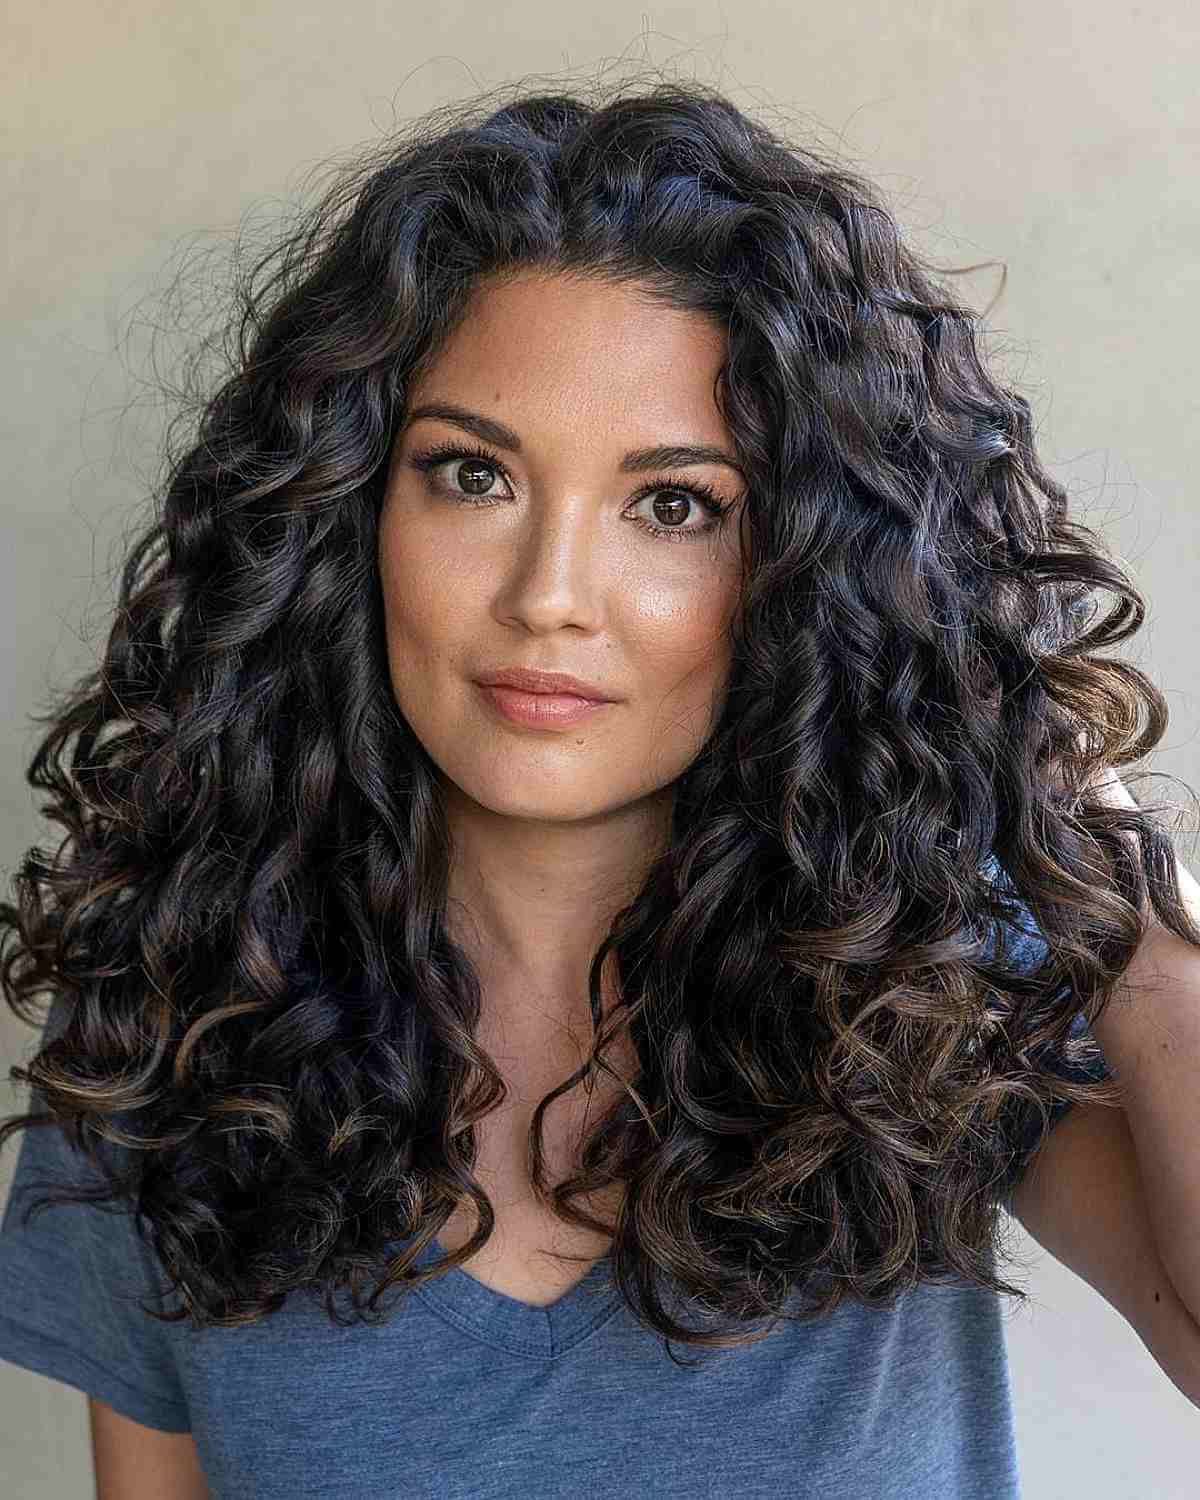 Best And Newest Medium Length Curly Haircuts Throughout 62 Best Shoulder Length Curly Hair Cuts & Styles In  (View 4 of 20)